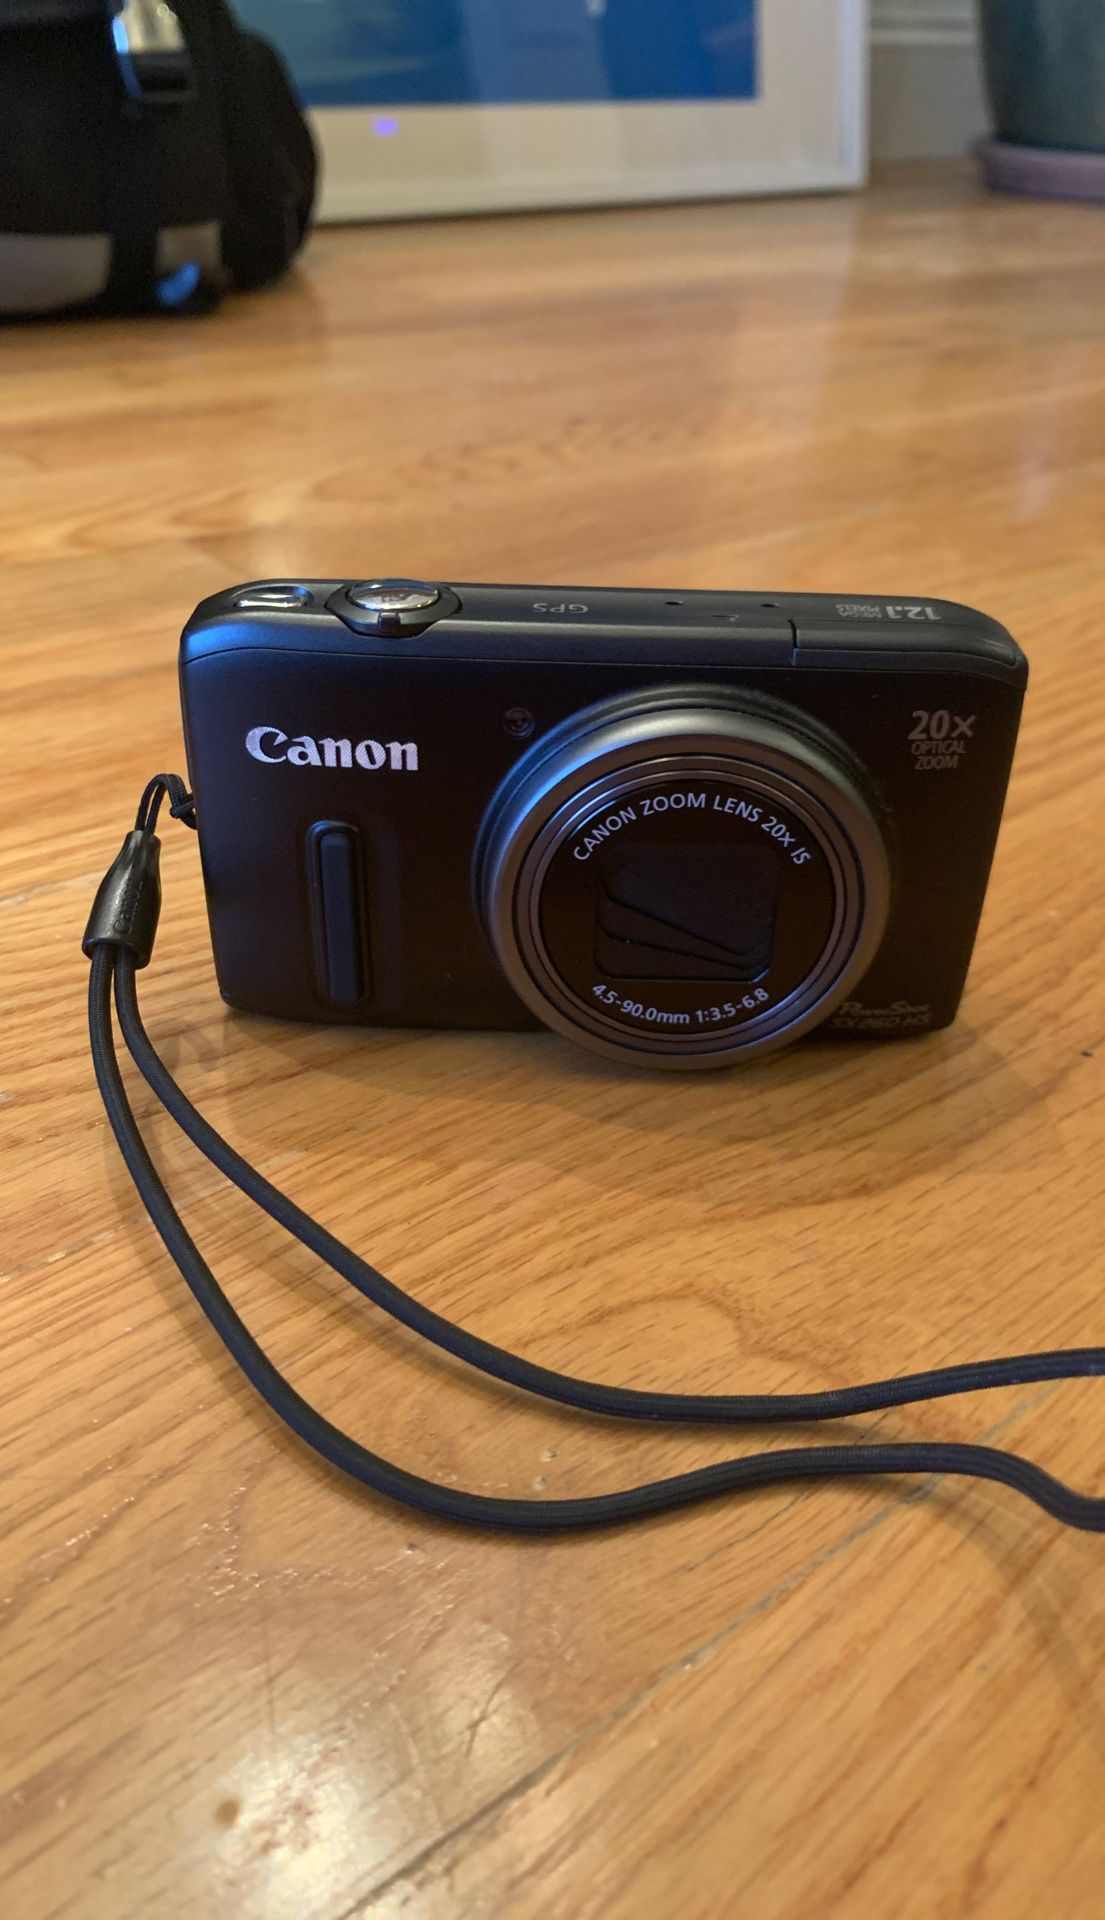 Canon Sx260 HS w/ battery and charger